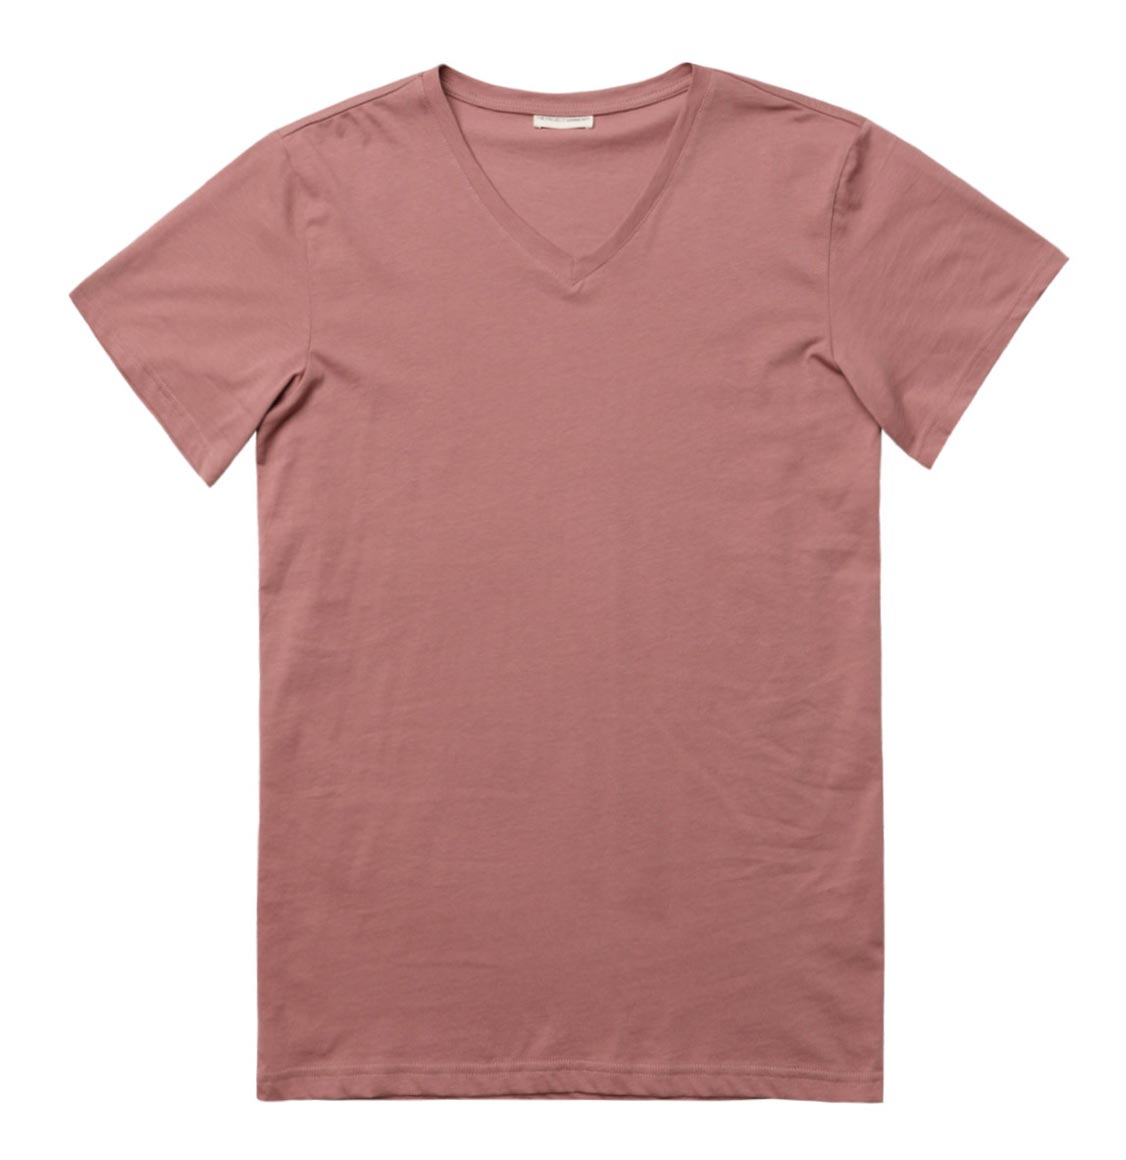 The Project Garments Organic Cotton V-neck T-shirt Rosewood